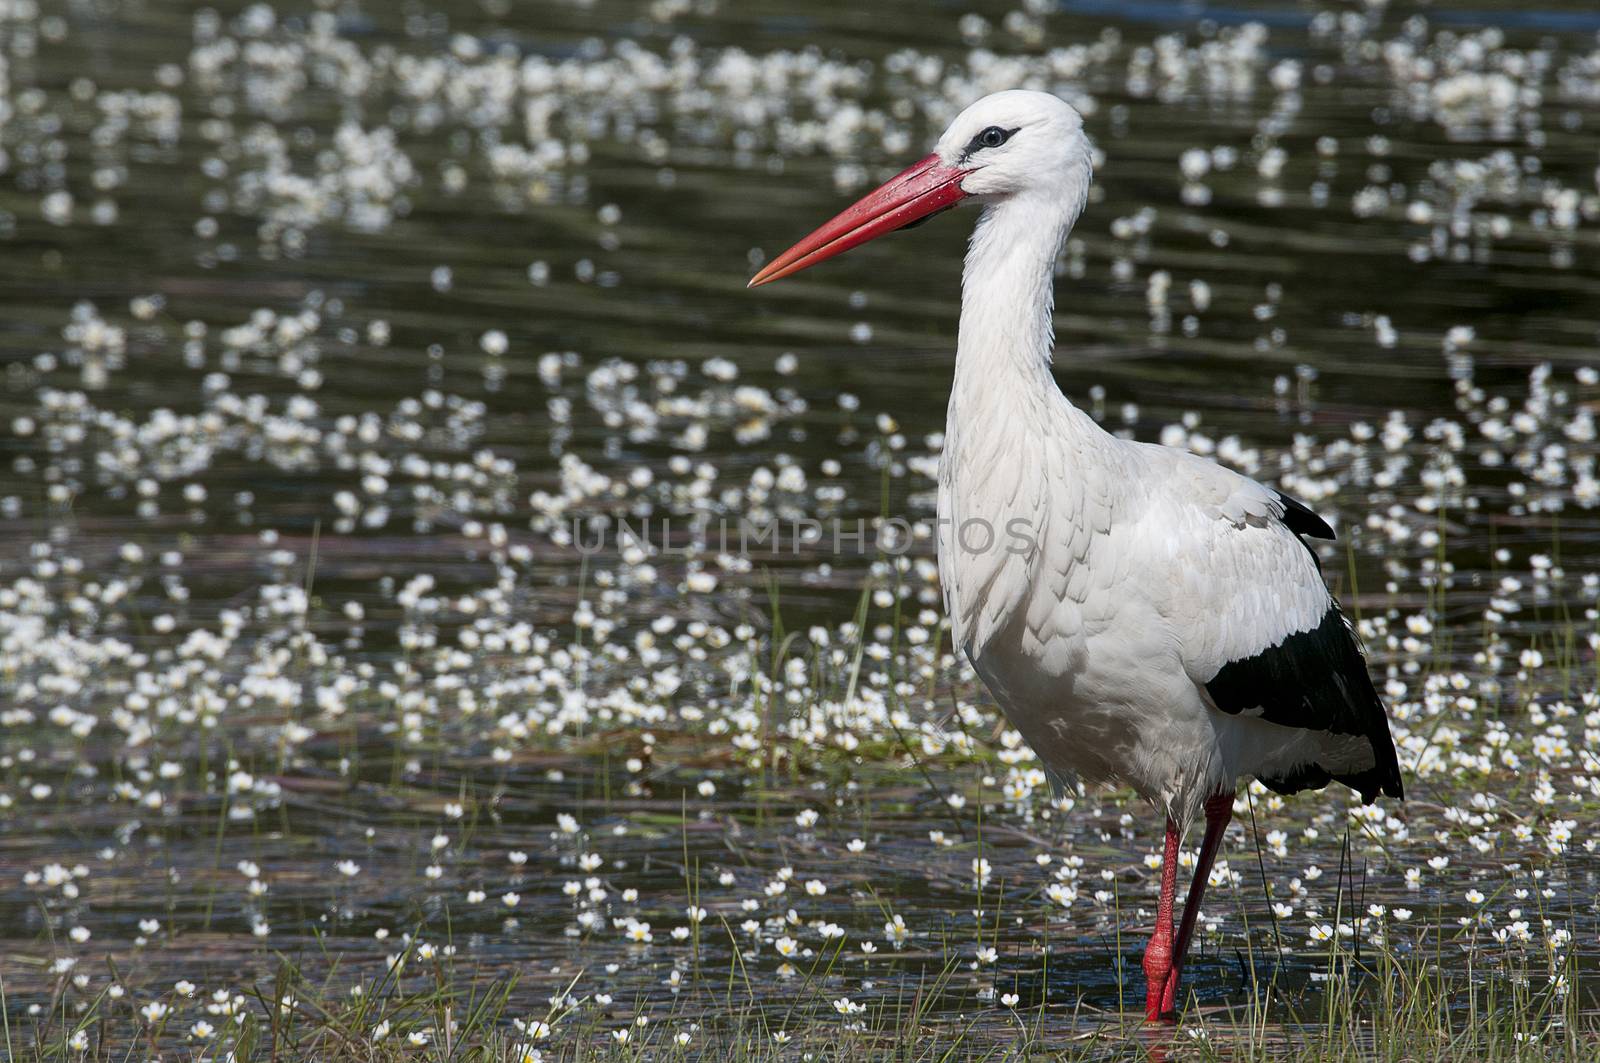 White stork (Ciconia ciconia) on the water in spring by jalonsohu@gmail.com